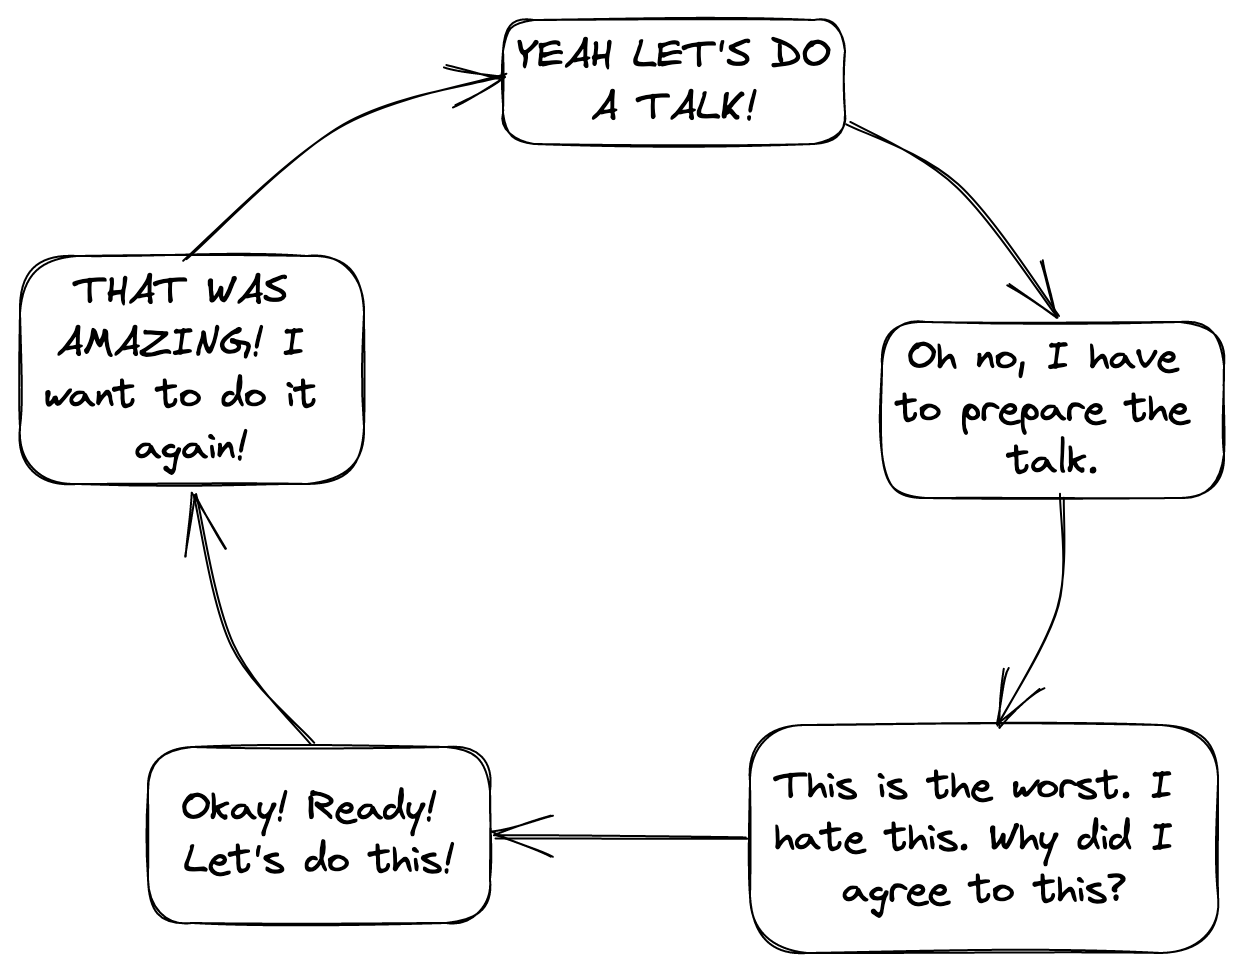 A circular flow diagram. The top box says "YEAH LET'S DO A TALK!", which flows to a box that says "Oh no, I have to prepare the talk.". That box flows to one that says "This is the worst. I hate this. Why did I agree to this?". The one after that says "Okay! Ready! Let's do this!", and the box after that says "THAT WAS AMAZING! I want to do it again!". That box points back round to the first box, in a circle.